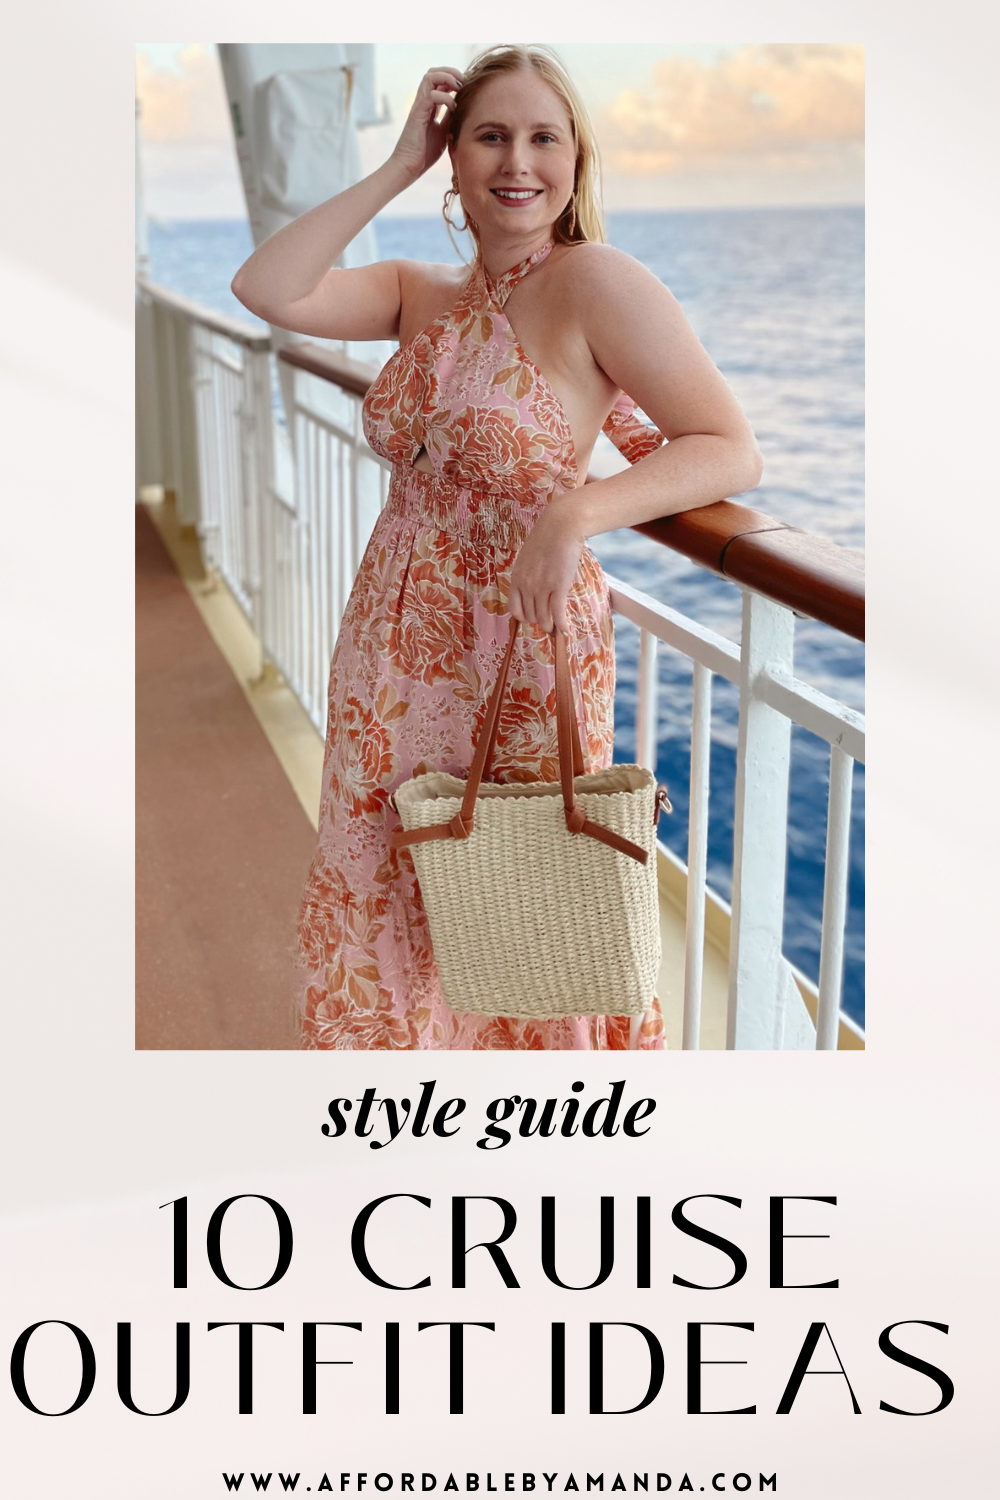 10 Cruise Outfit Ideas for Women - Affordable by Amanda